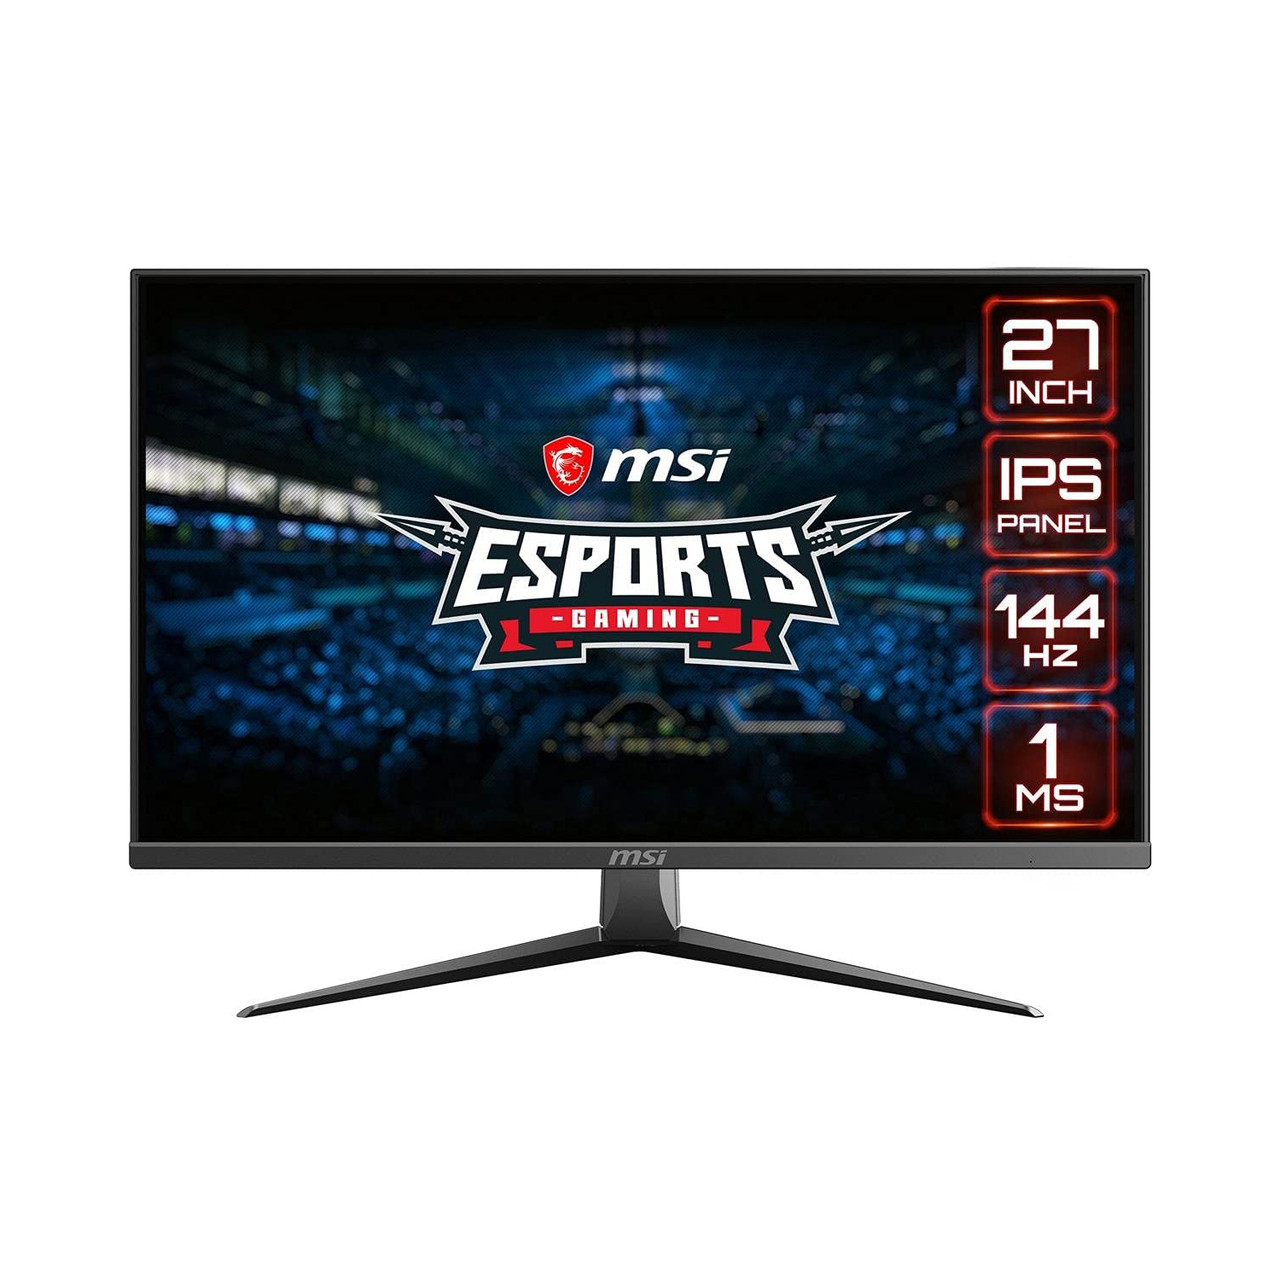 MSI OPTIX MAG273 27" 16:9 Full HD 144Hz HDR Ready IPS Gaming Monitor with FreeSync